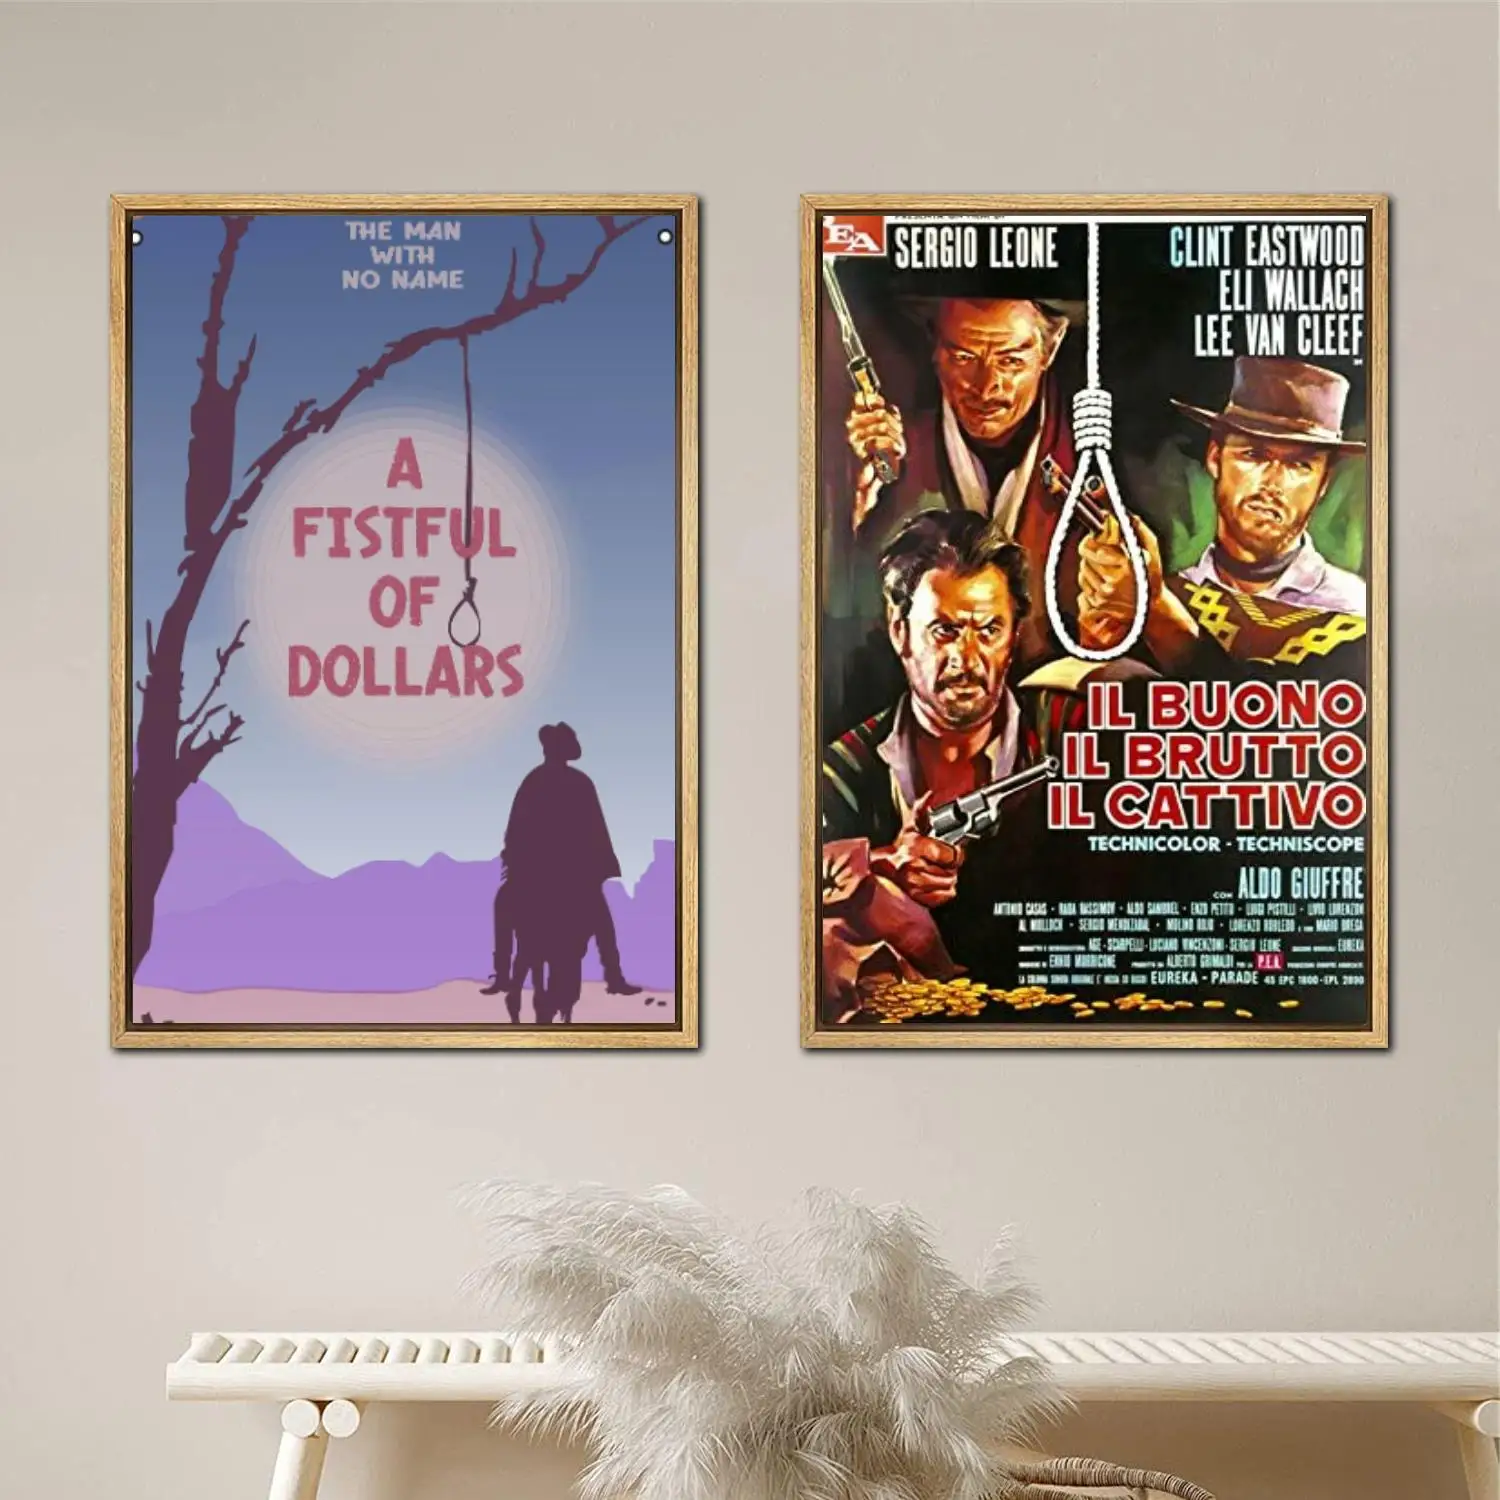 fistful of dollars Poster Painting 24x36 Wall Art Canvas Posters room decor Modern Family bedroom Decoration Art wall decor